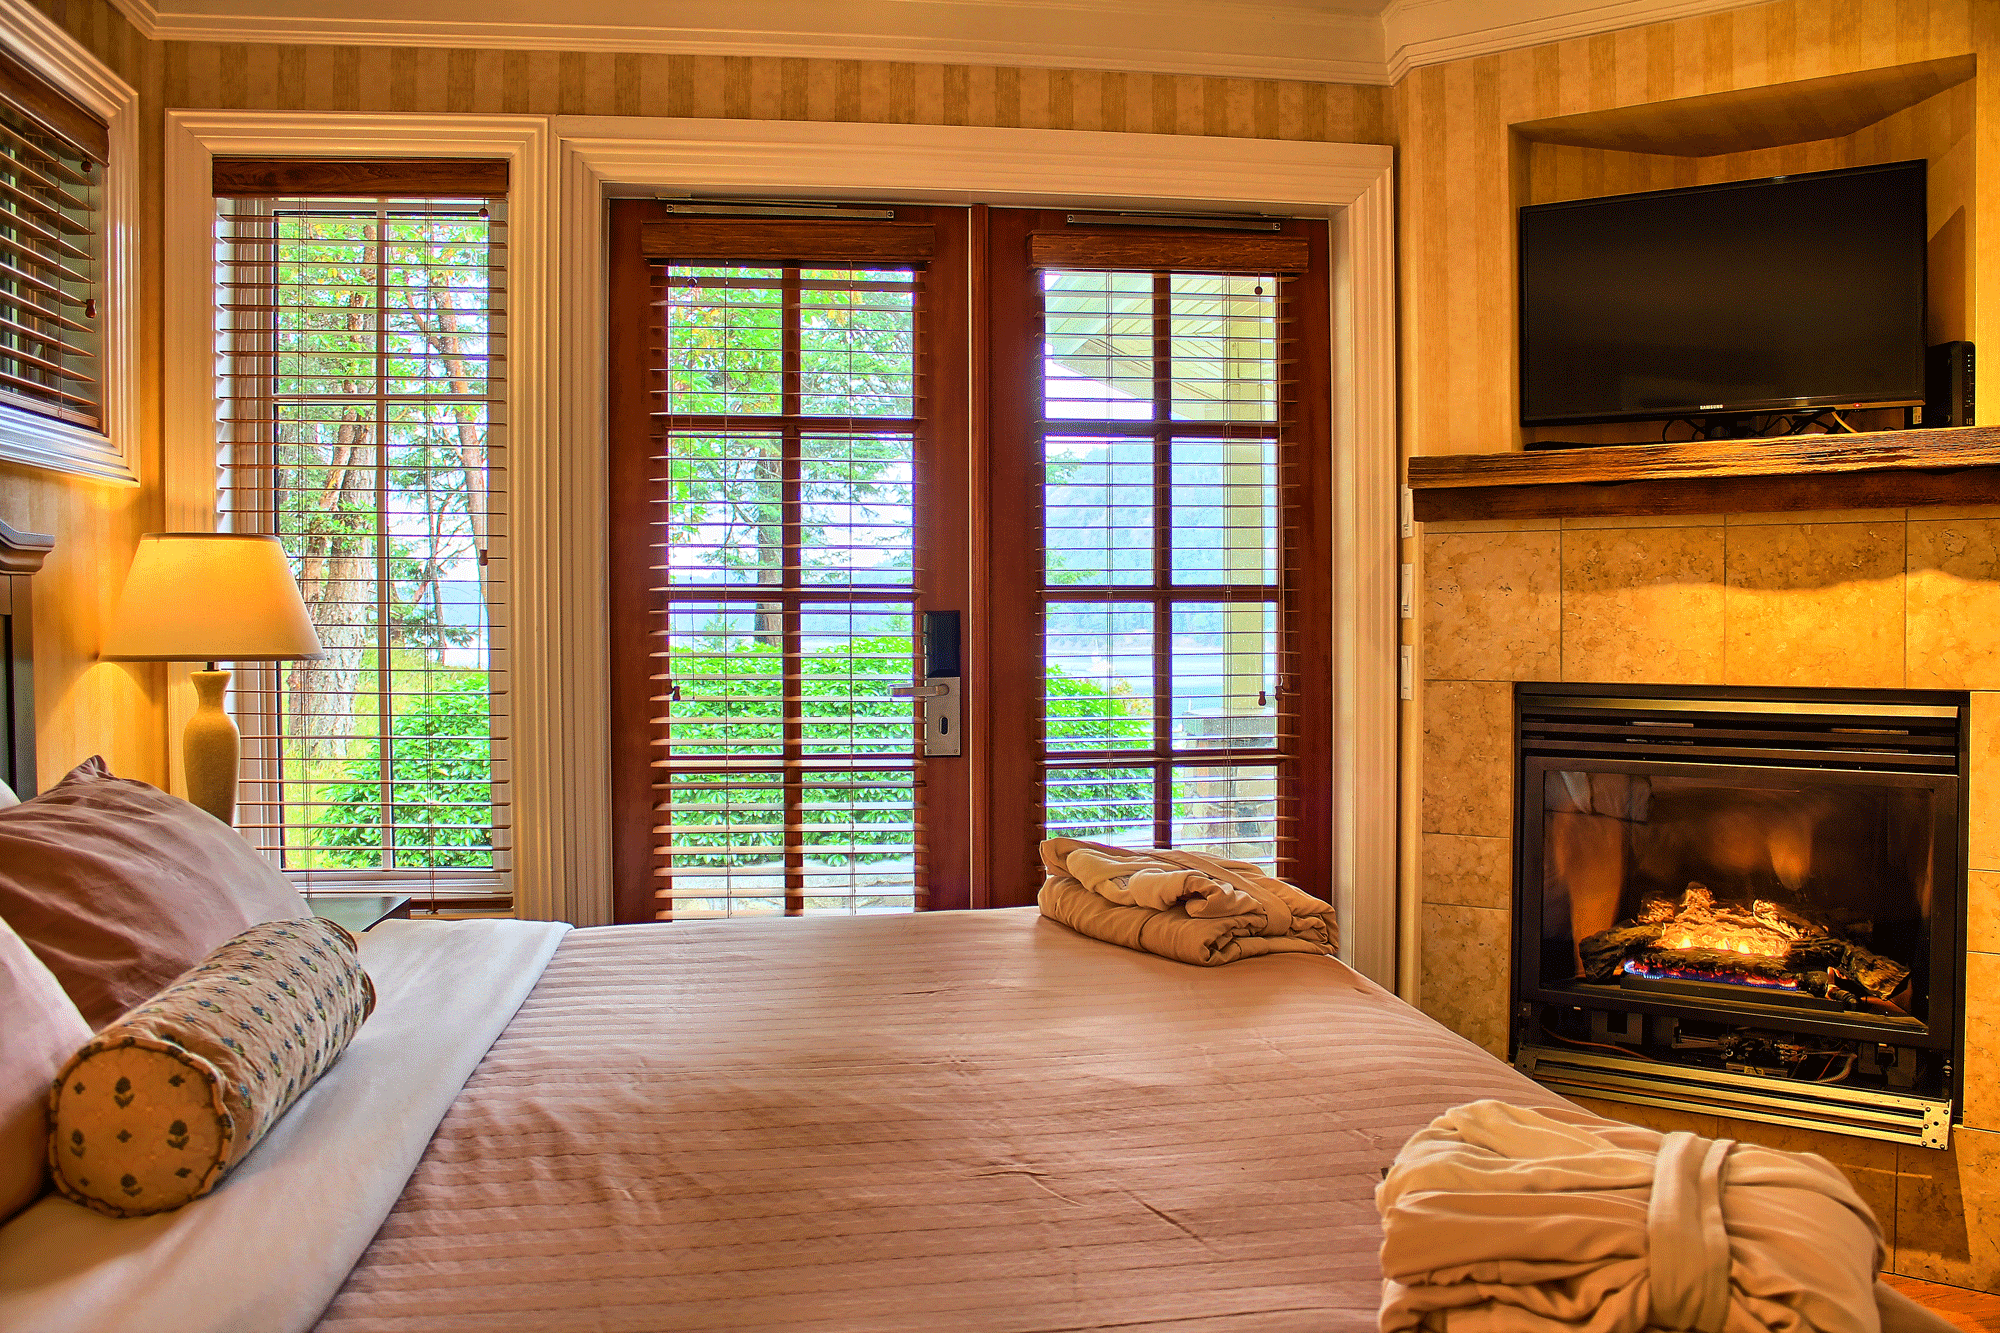 bed next to fireplace and doors to the outside